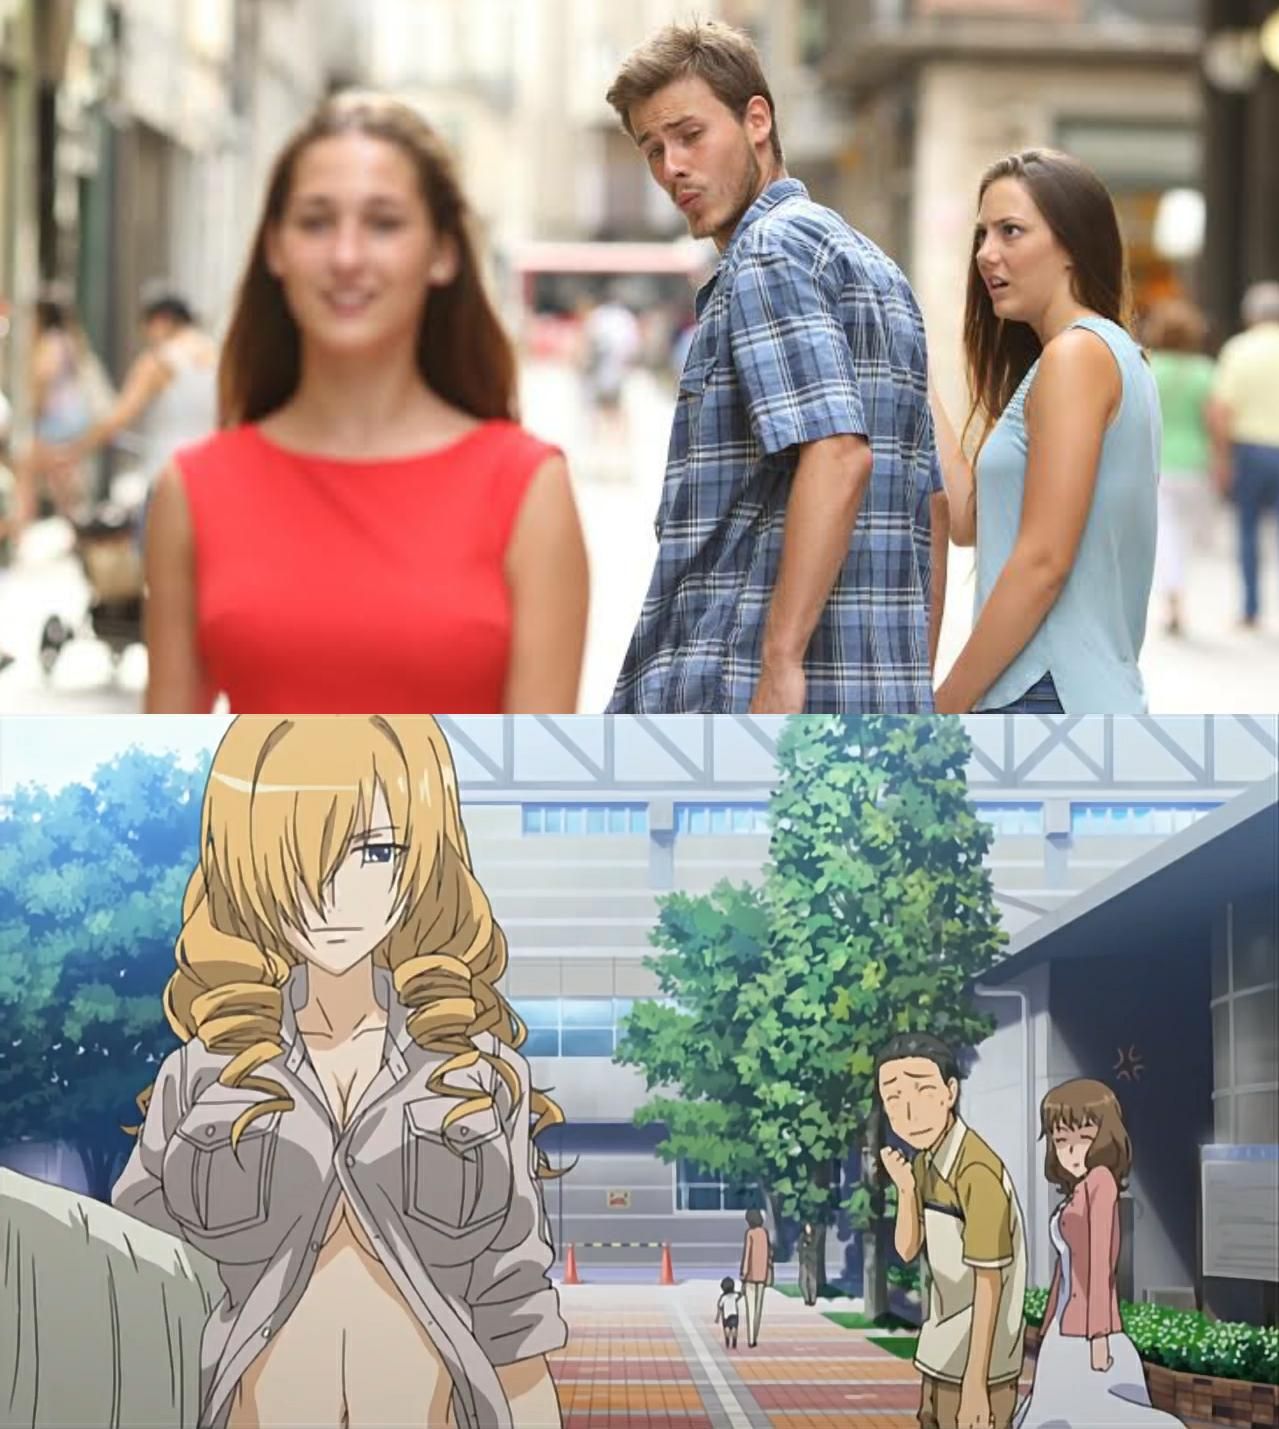 Index did it better